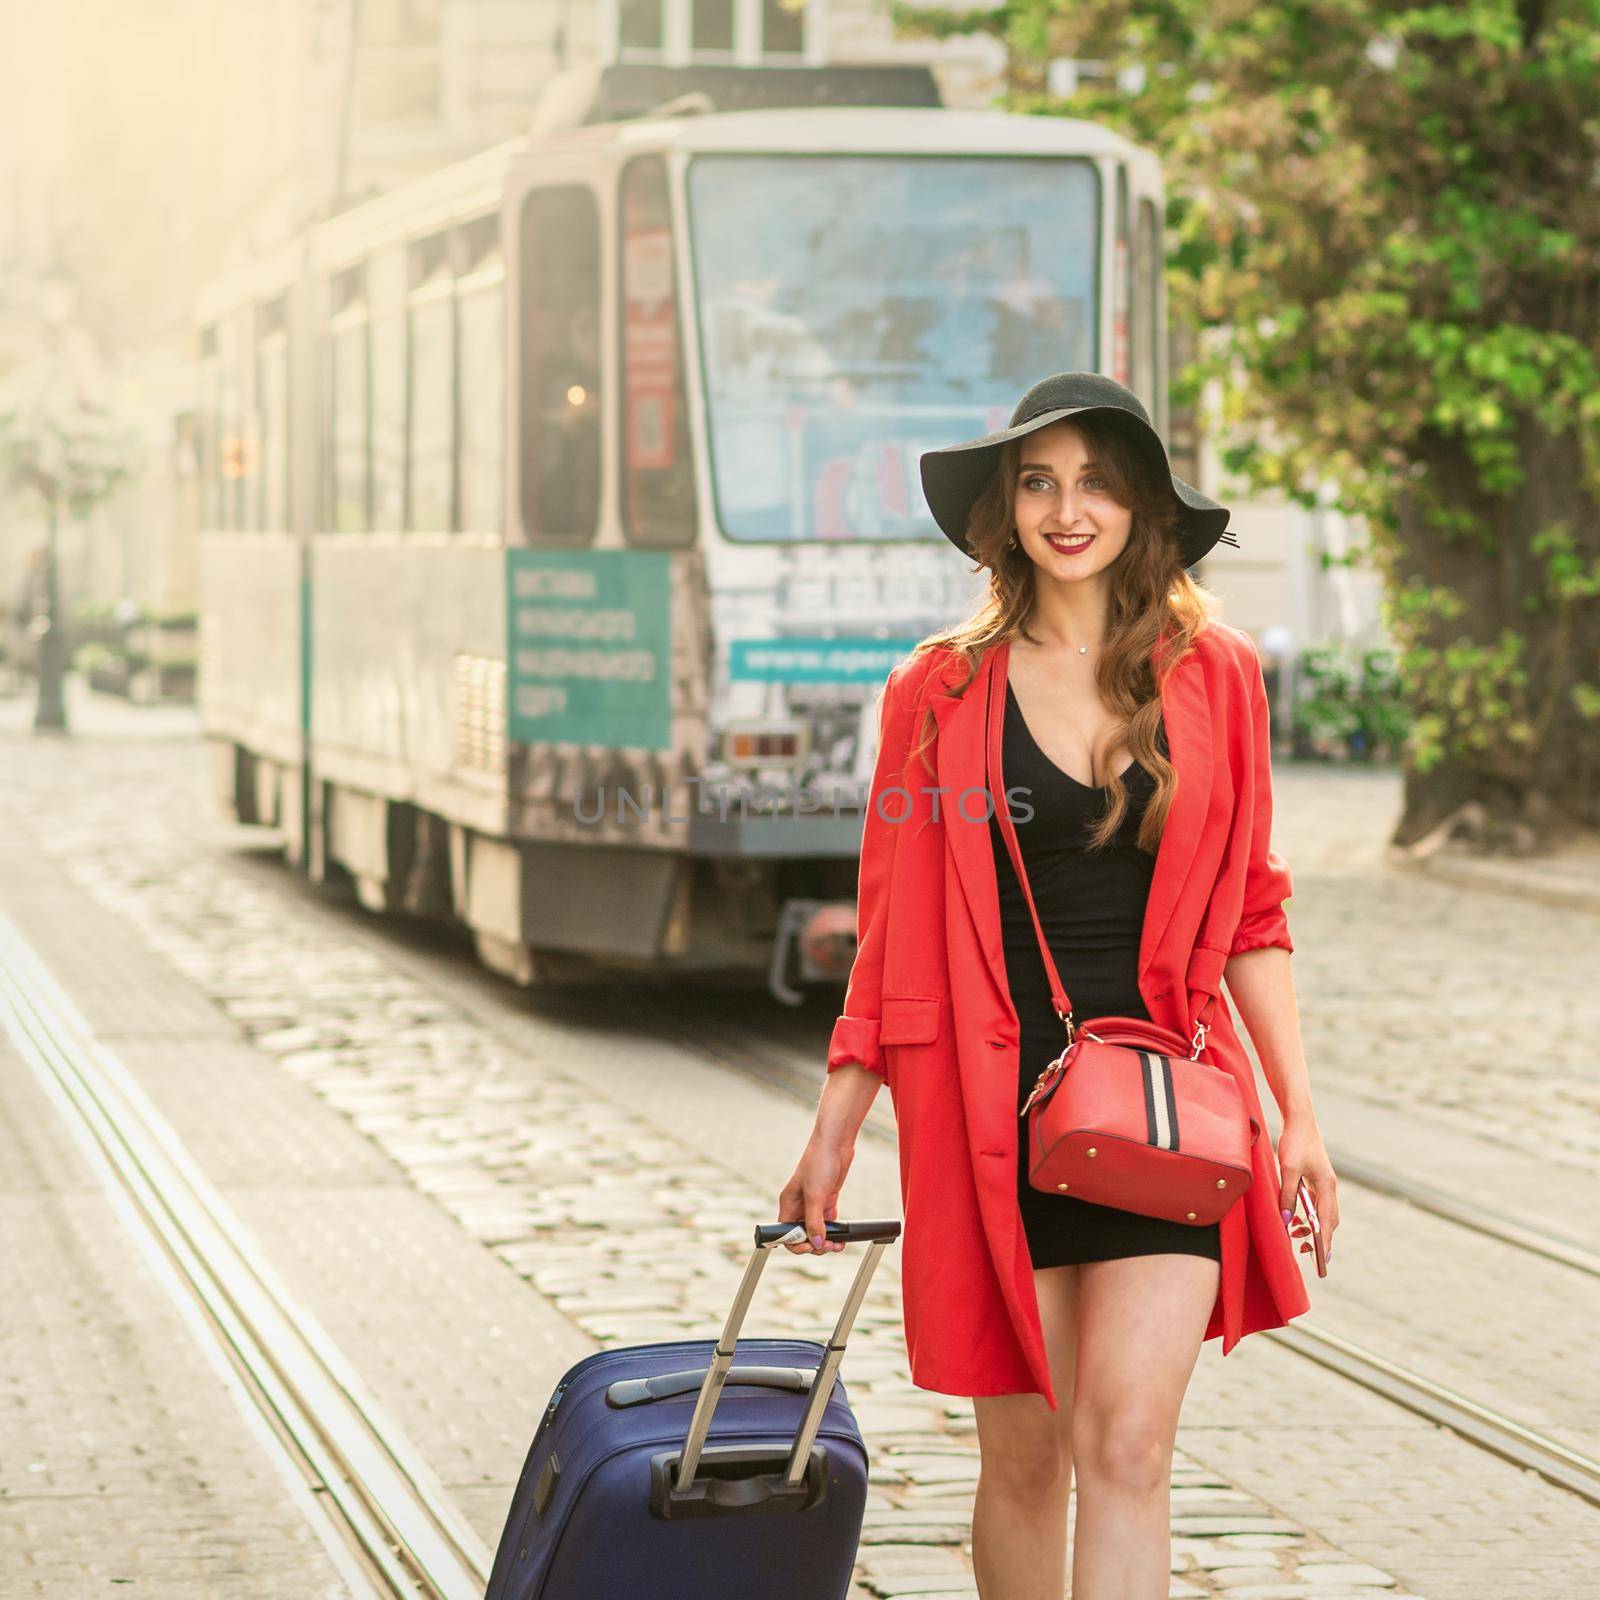 Tourist young woman traveling on the tram track road of the old city street.